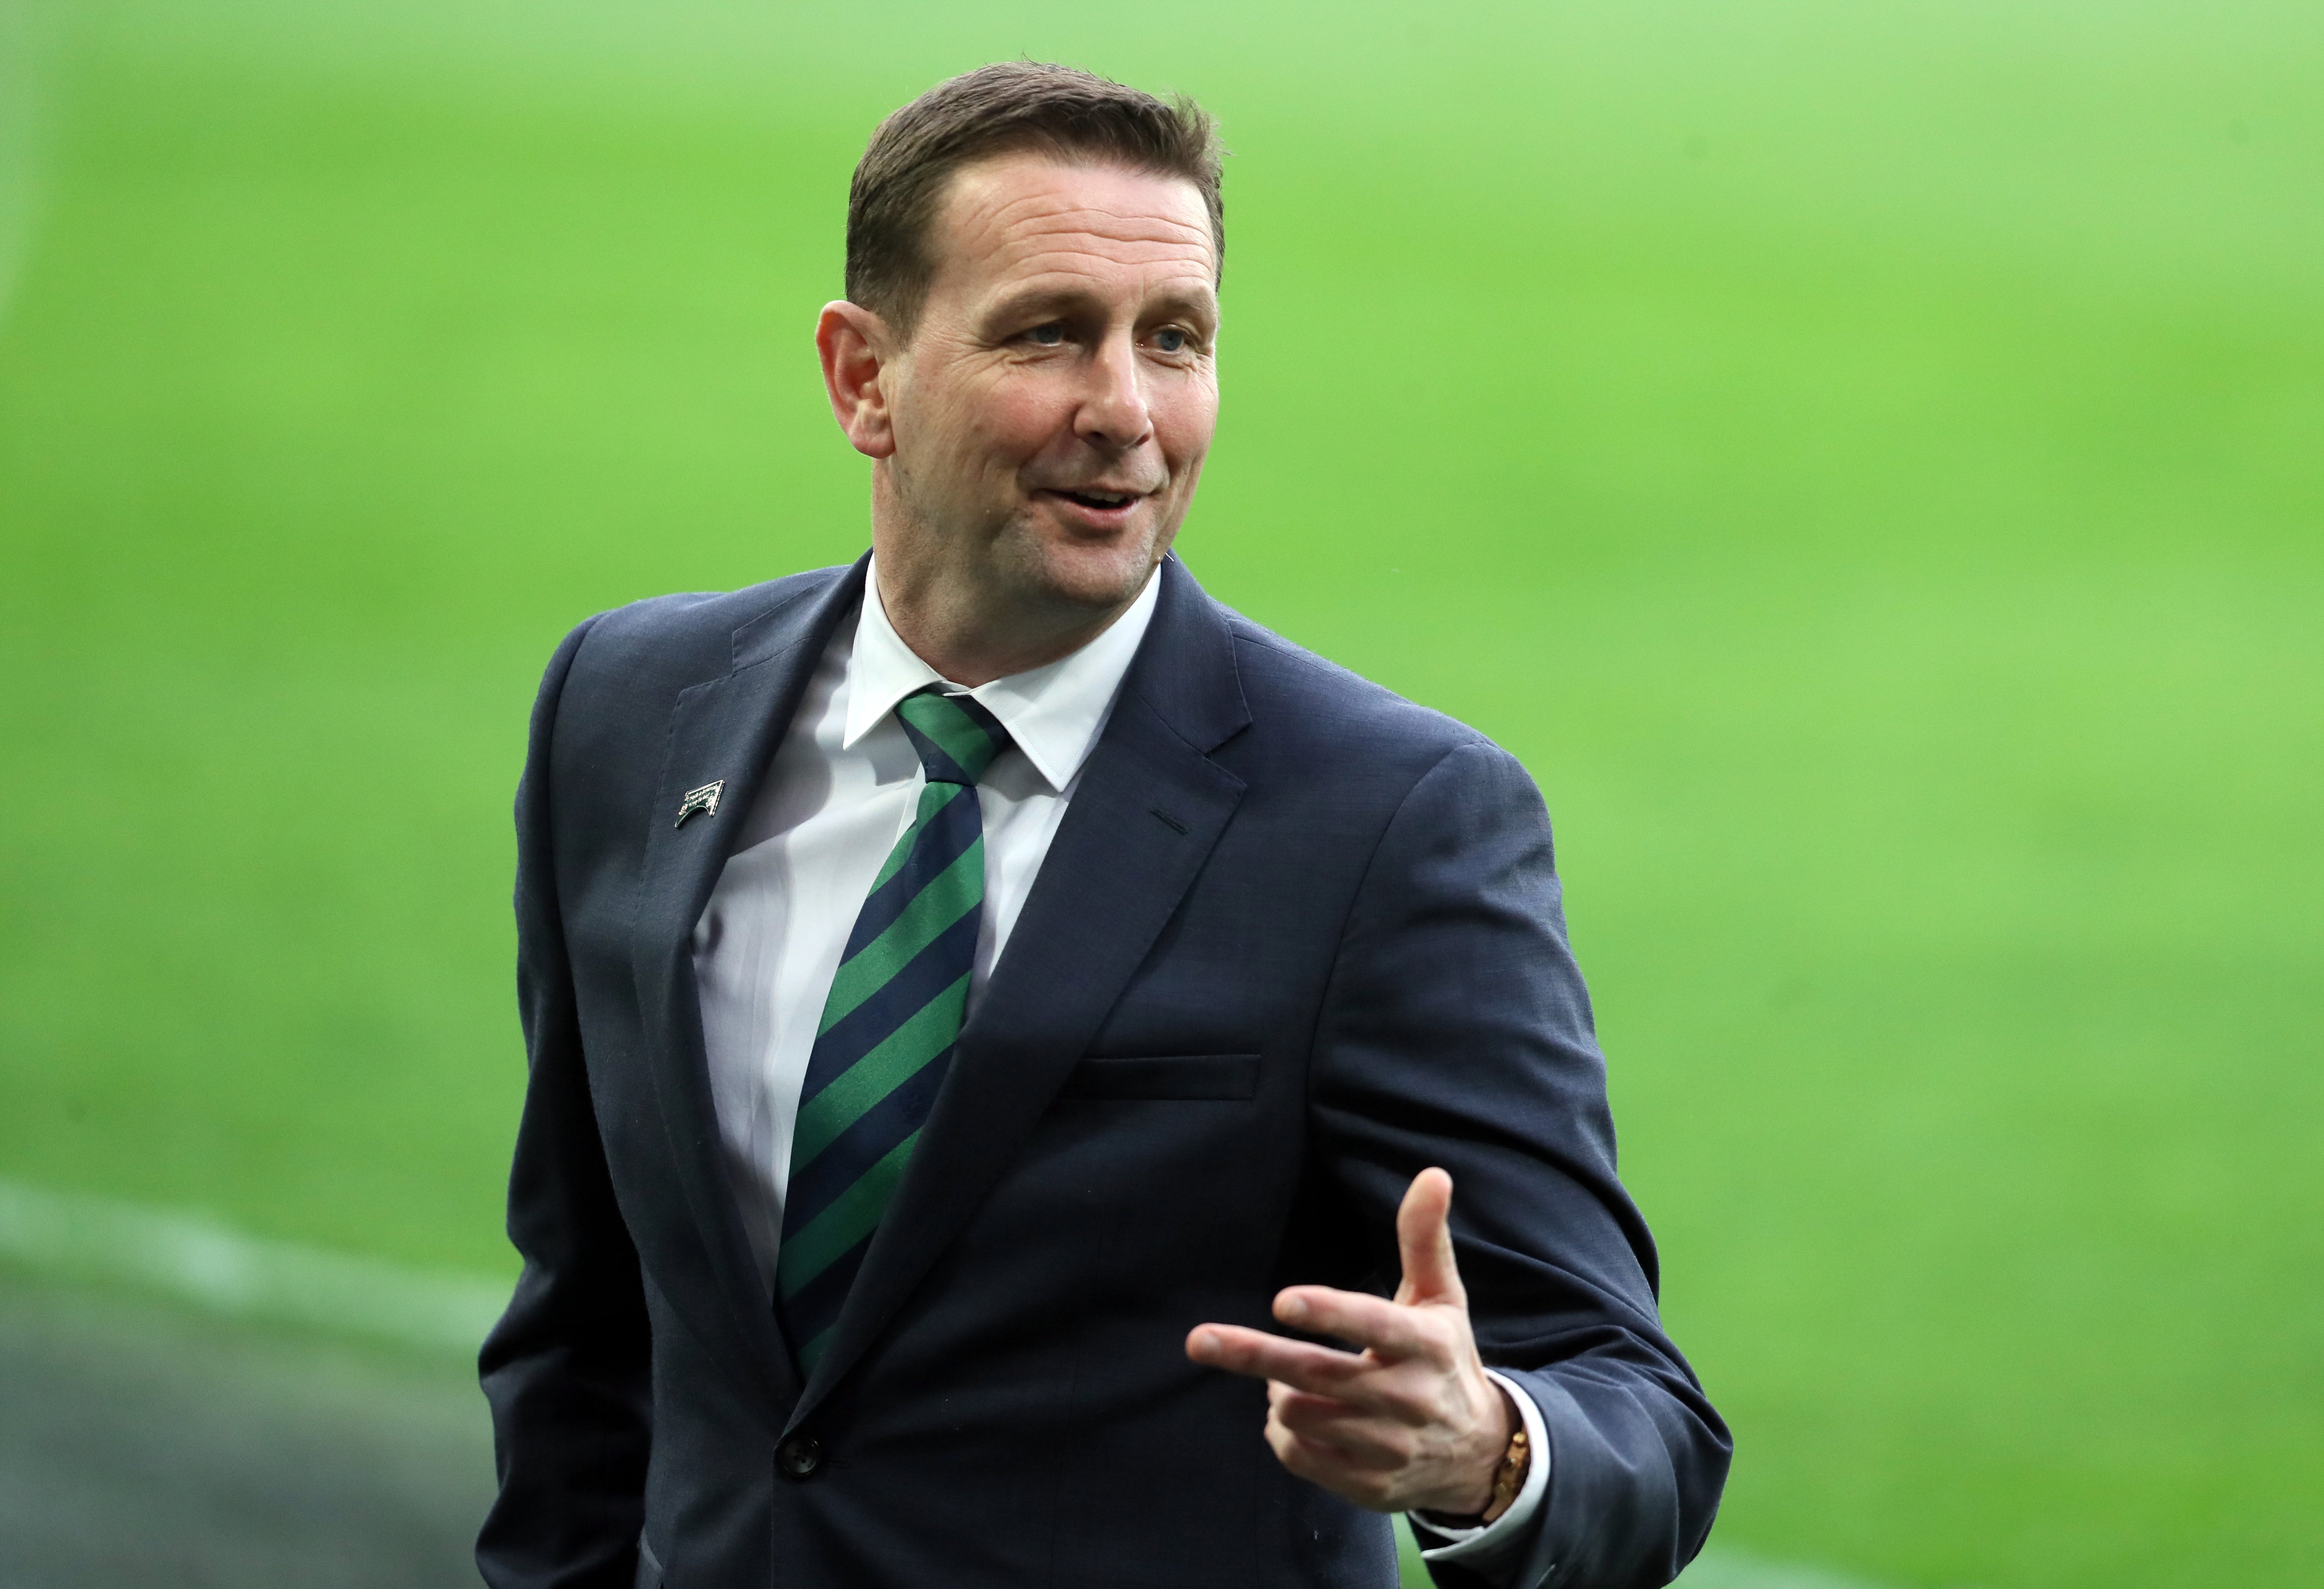 Ian Baraclough said his players would benefit from the experience after losing 1-0 to Ukraine on Thursday